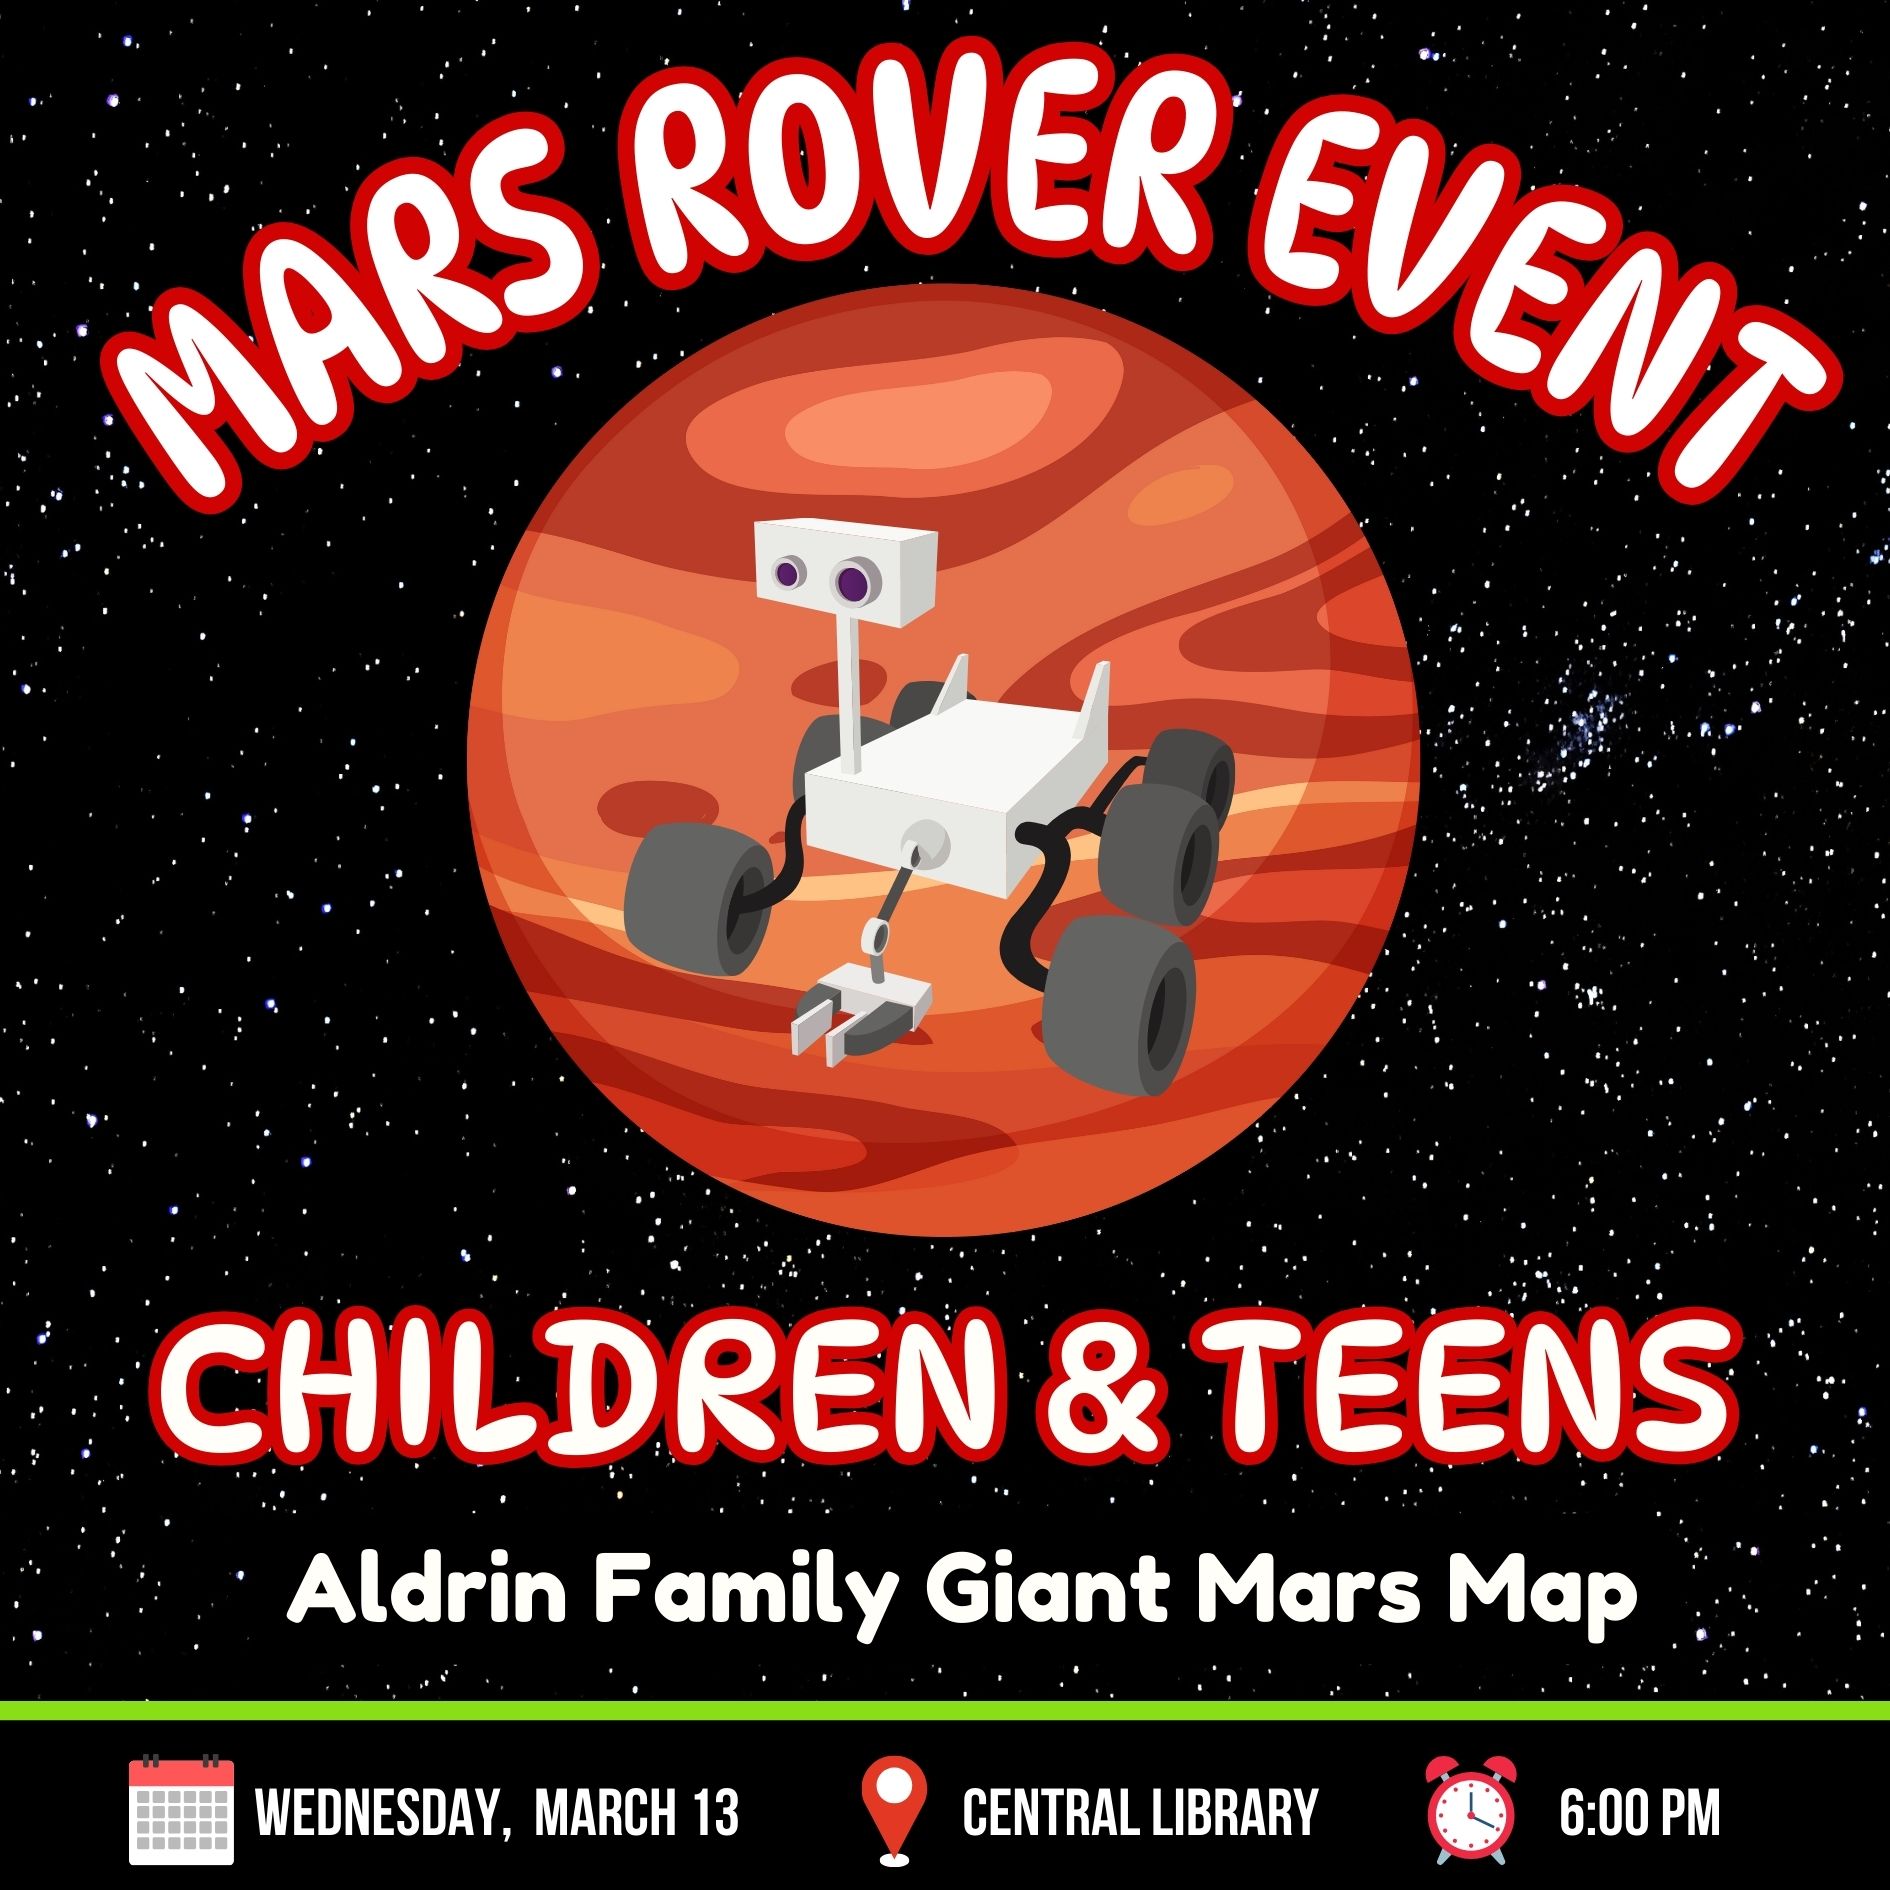 MARCH 13_ MARS ROVER EVENT